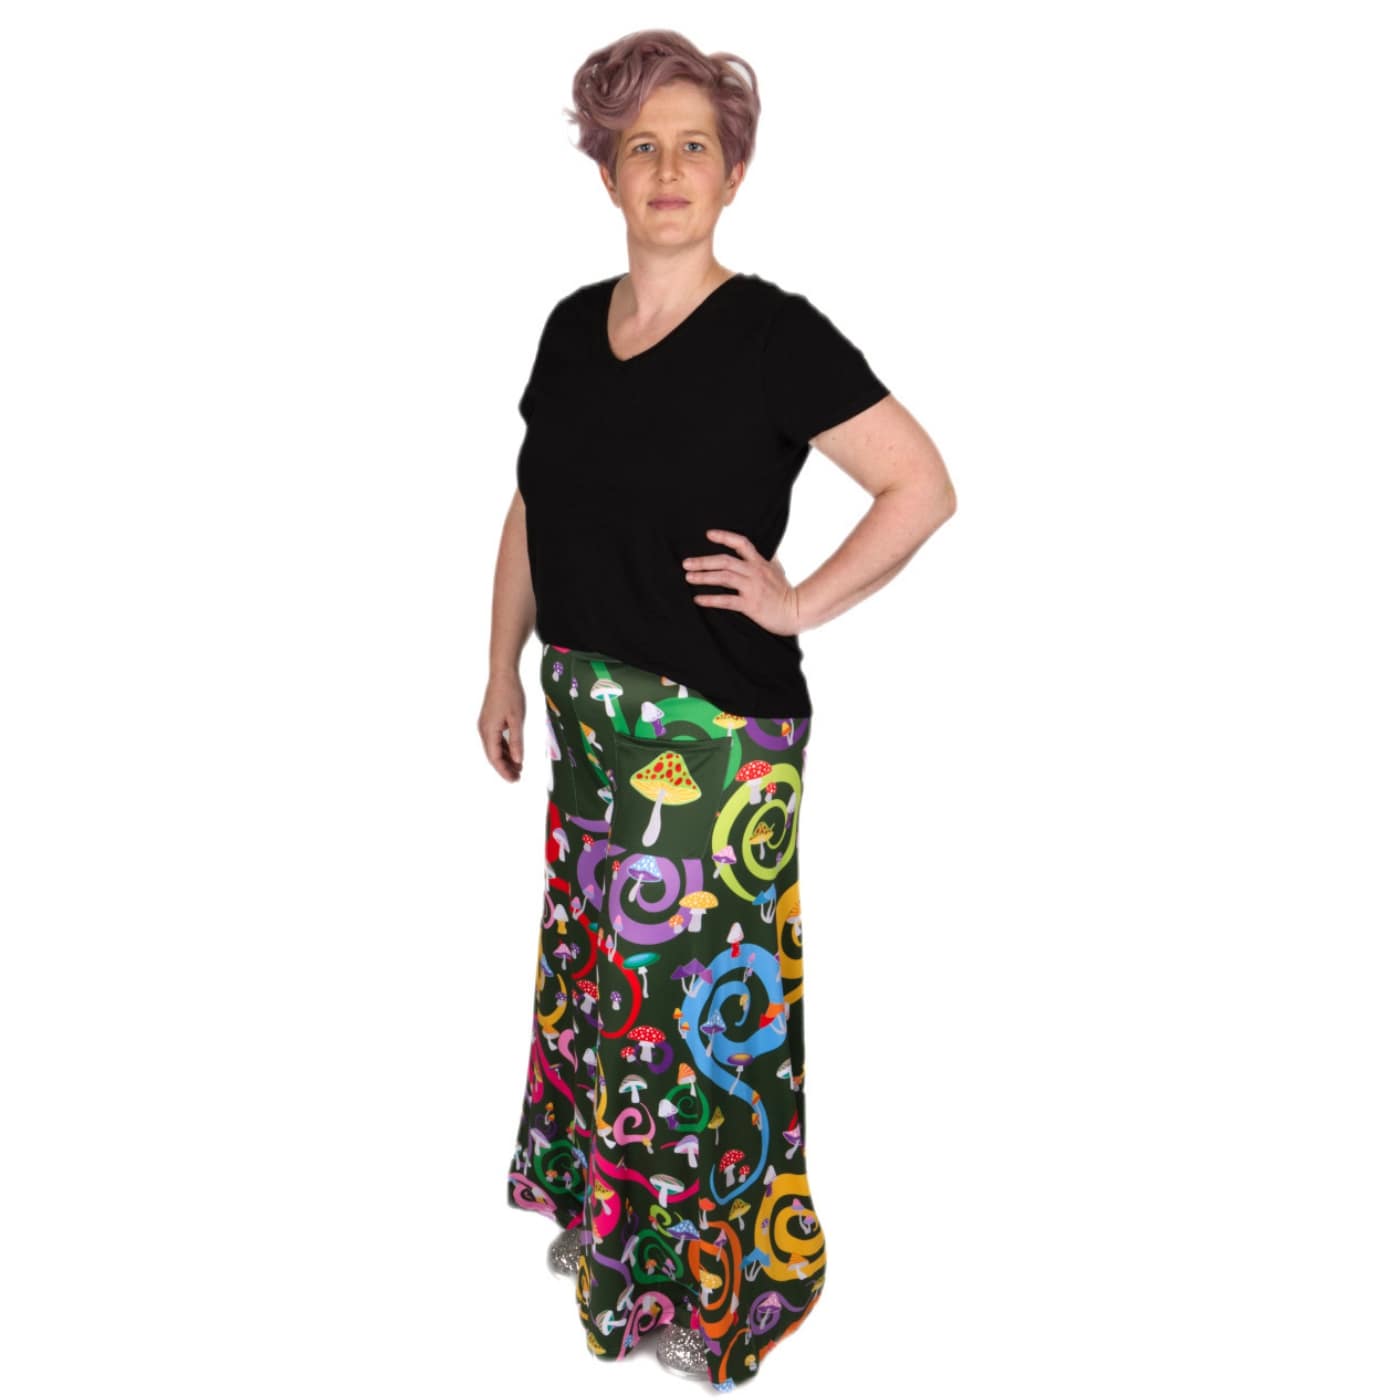 Toadstool Wide Leg Pants by RainbowsAndFairies.com.au (Mushroom - Psychedelic Swirl - Woodstock - Vintage Inspired - Flares - Pants With Pockets) - SKU: CL_WIDEL_TOADS_ORG - Pic-05